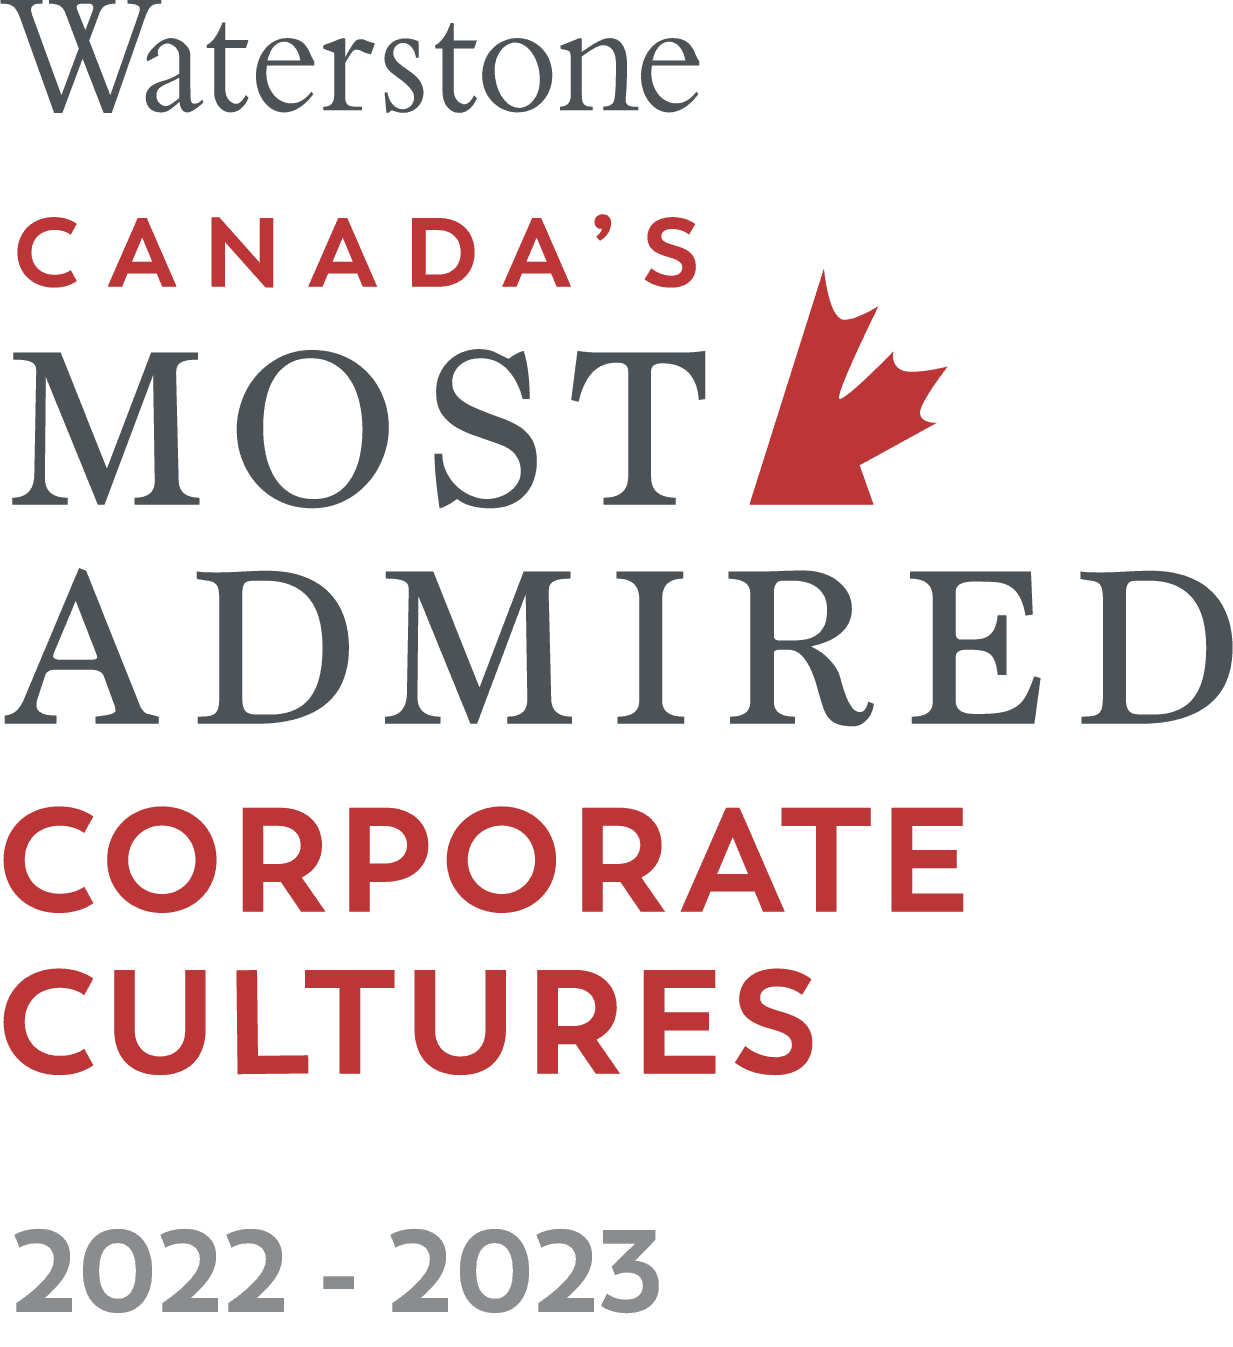 Waterstone Canada's Most Admired award logo.